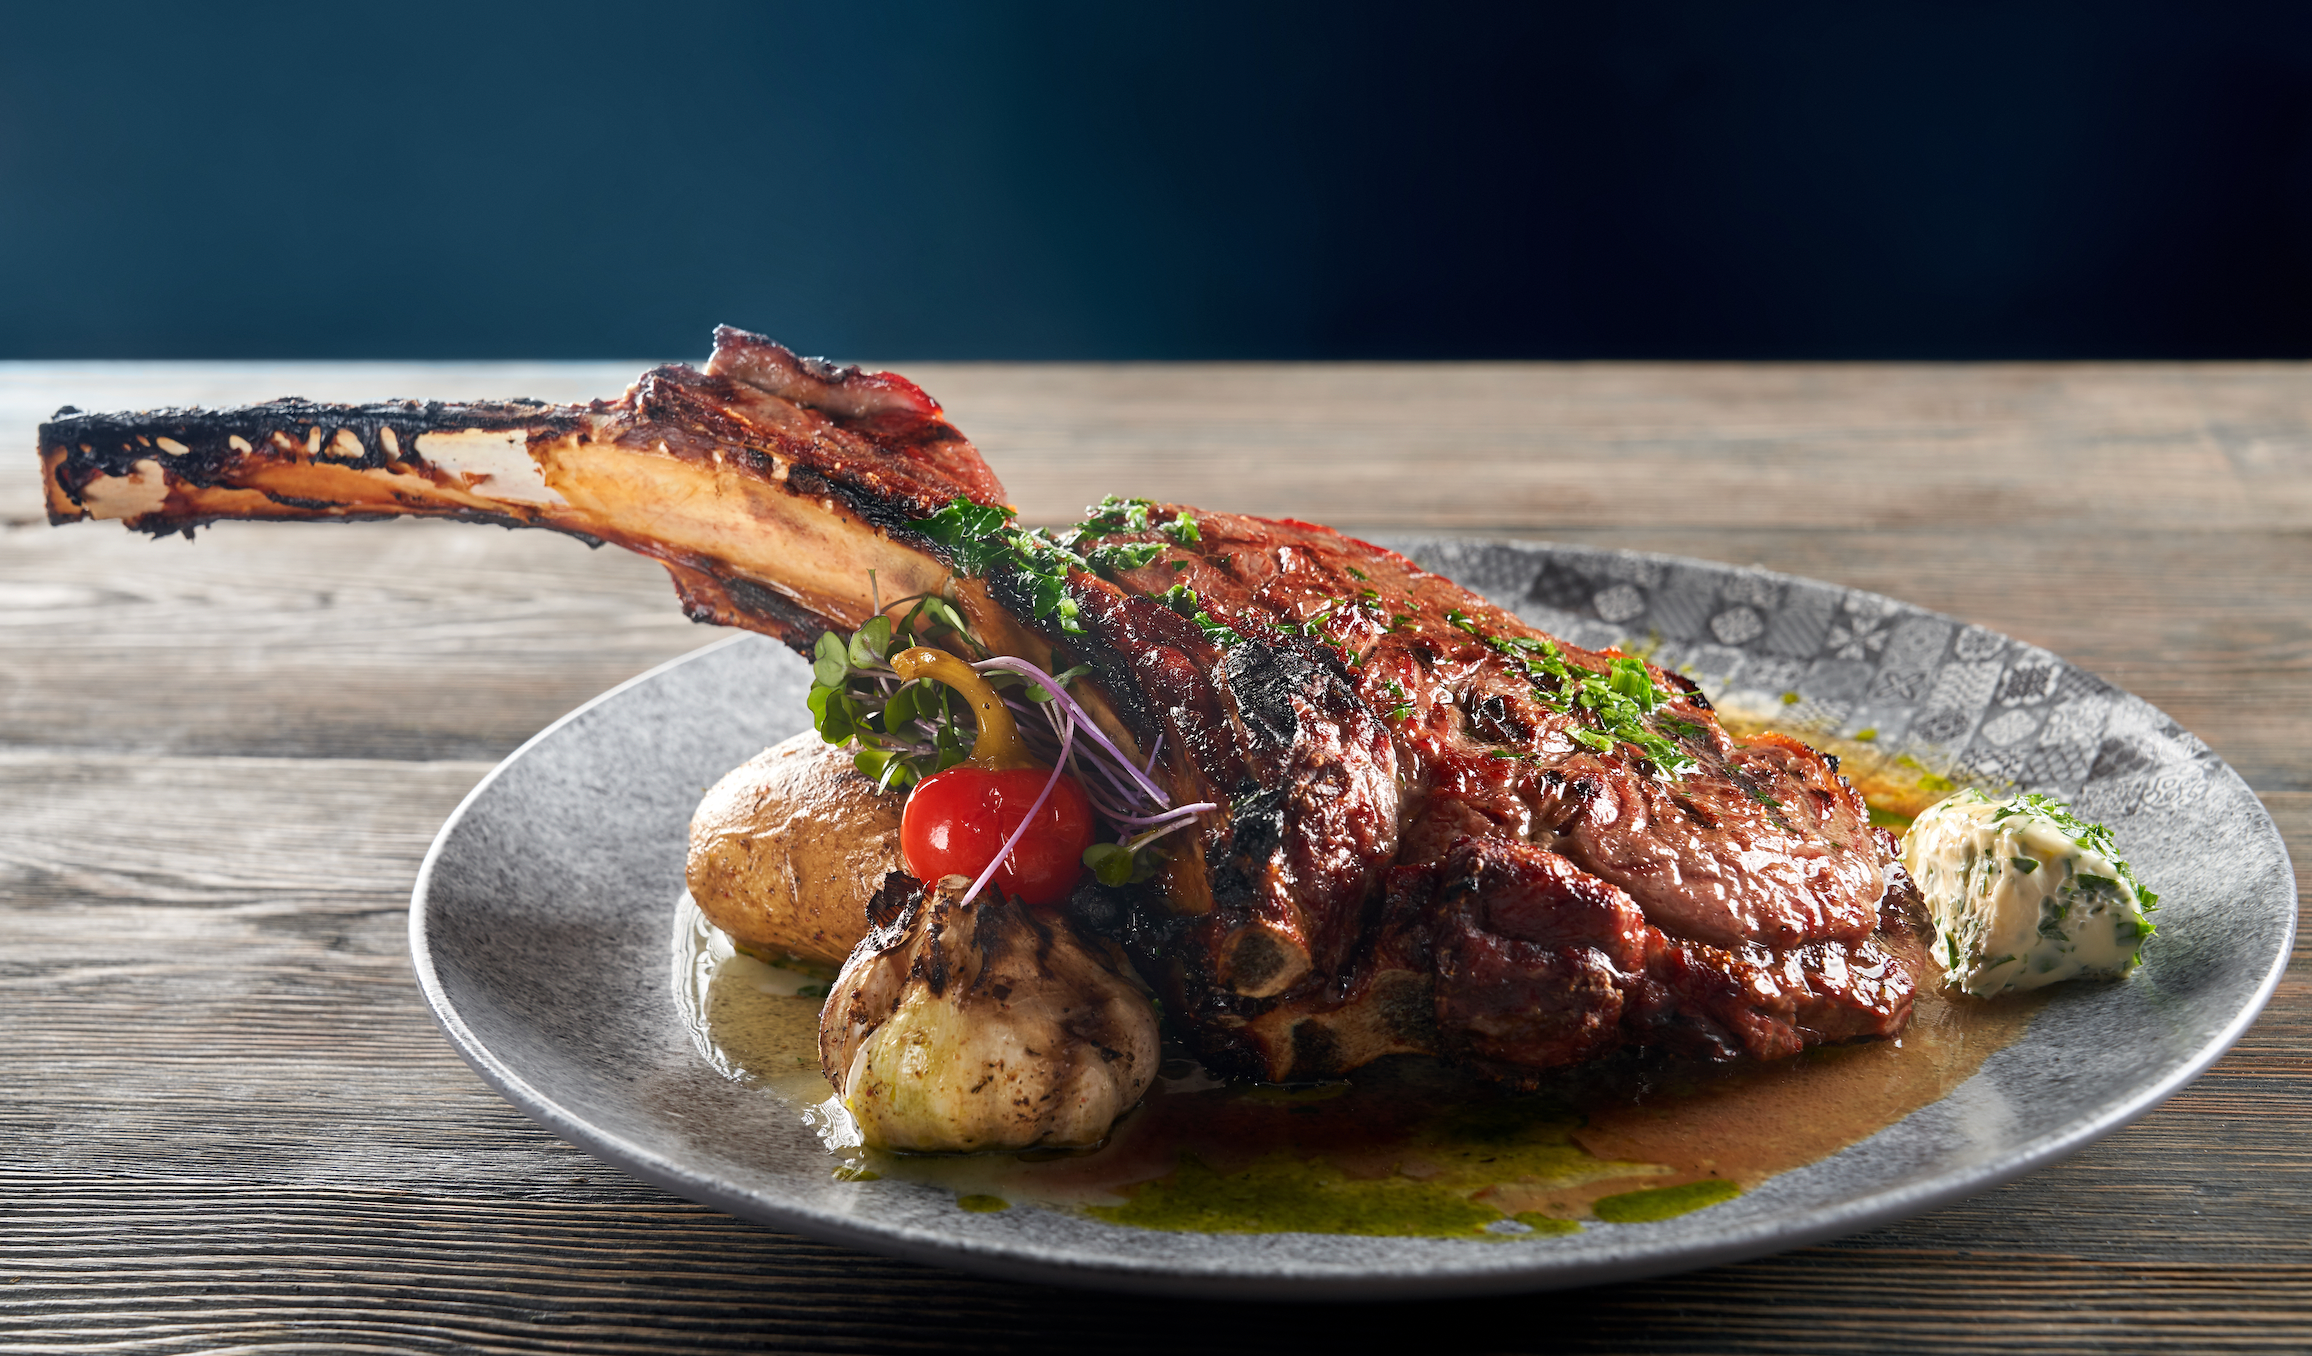 Impress Your Guests with This Mouth-Watering Grilled Lamb Chops with Mint Chimichurri Recipe